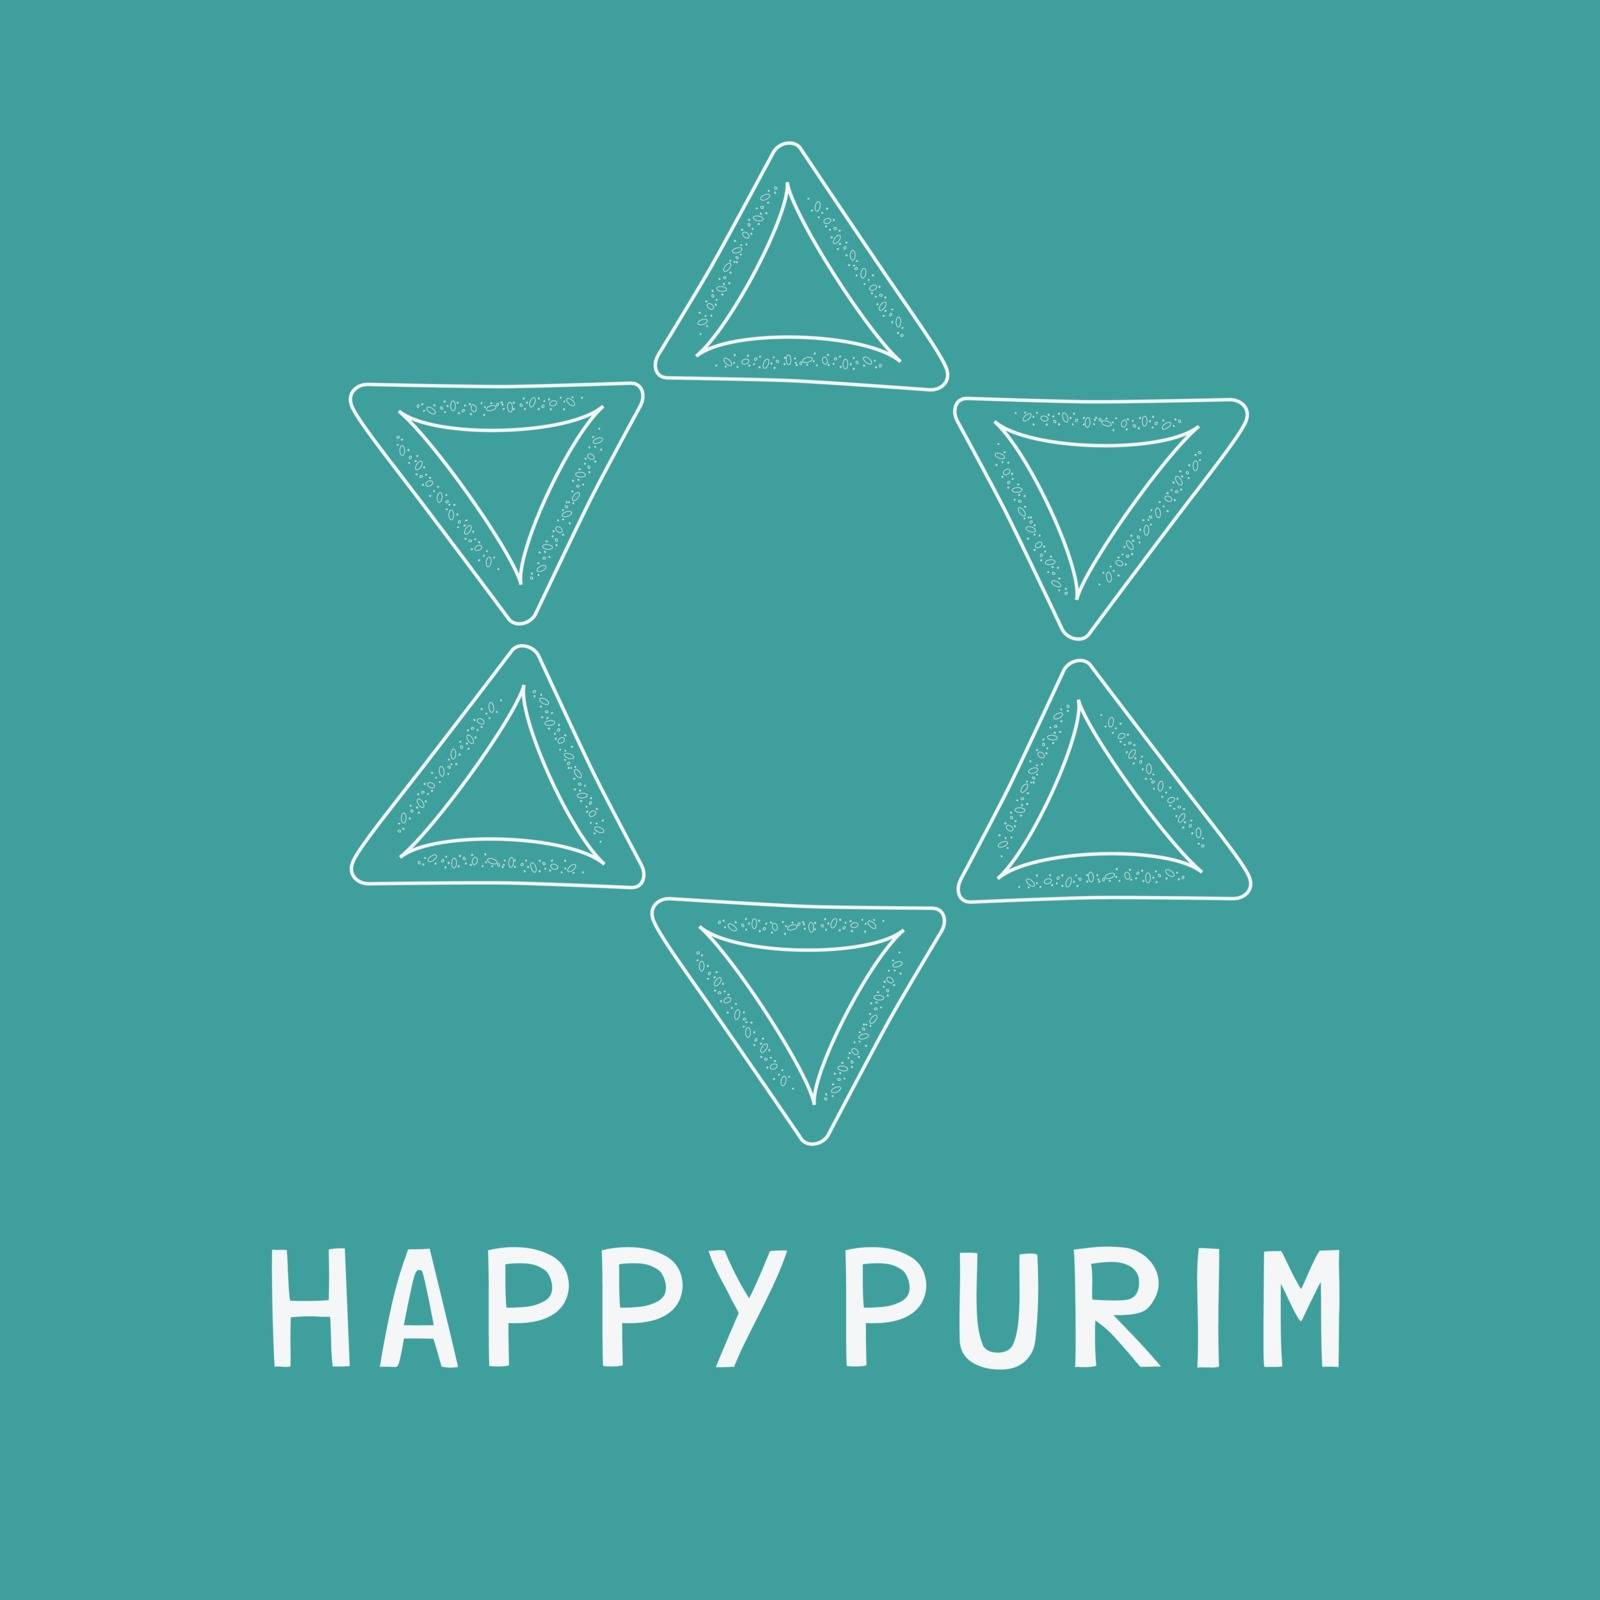 Purim holiday flat design white thin line icons of hamantashs in star of david shape with text in english "Happy Purim". Vector eps10 illustration.
